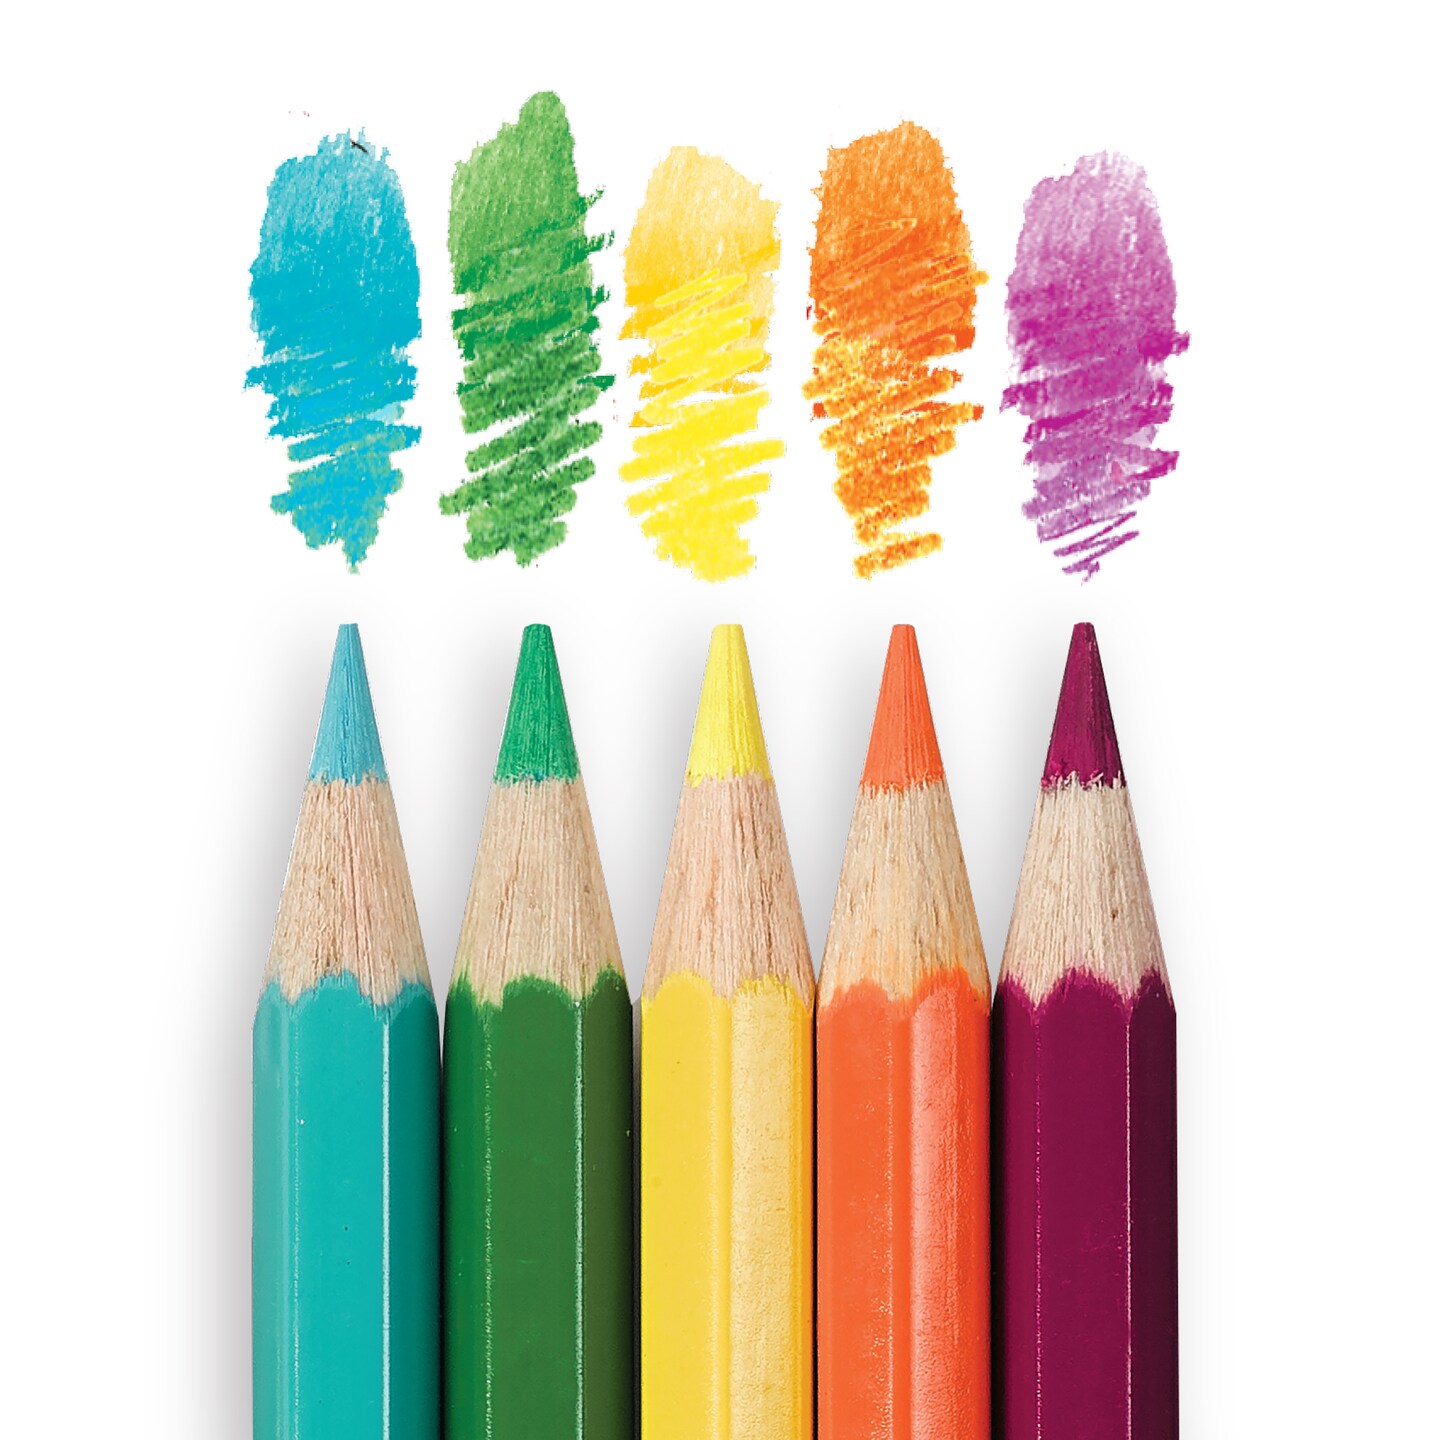 Faber Castell How to Watercolor Pencils Starter Set-Rainbow